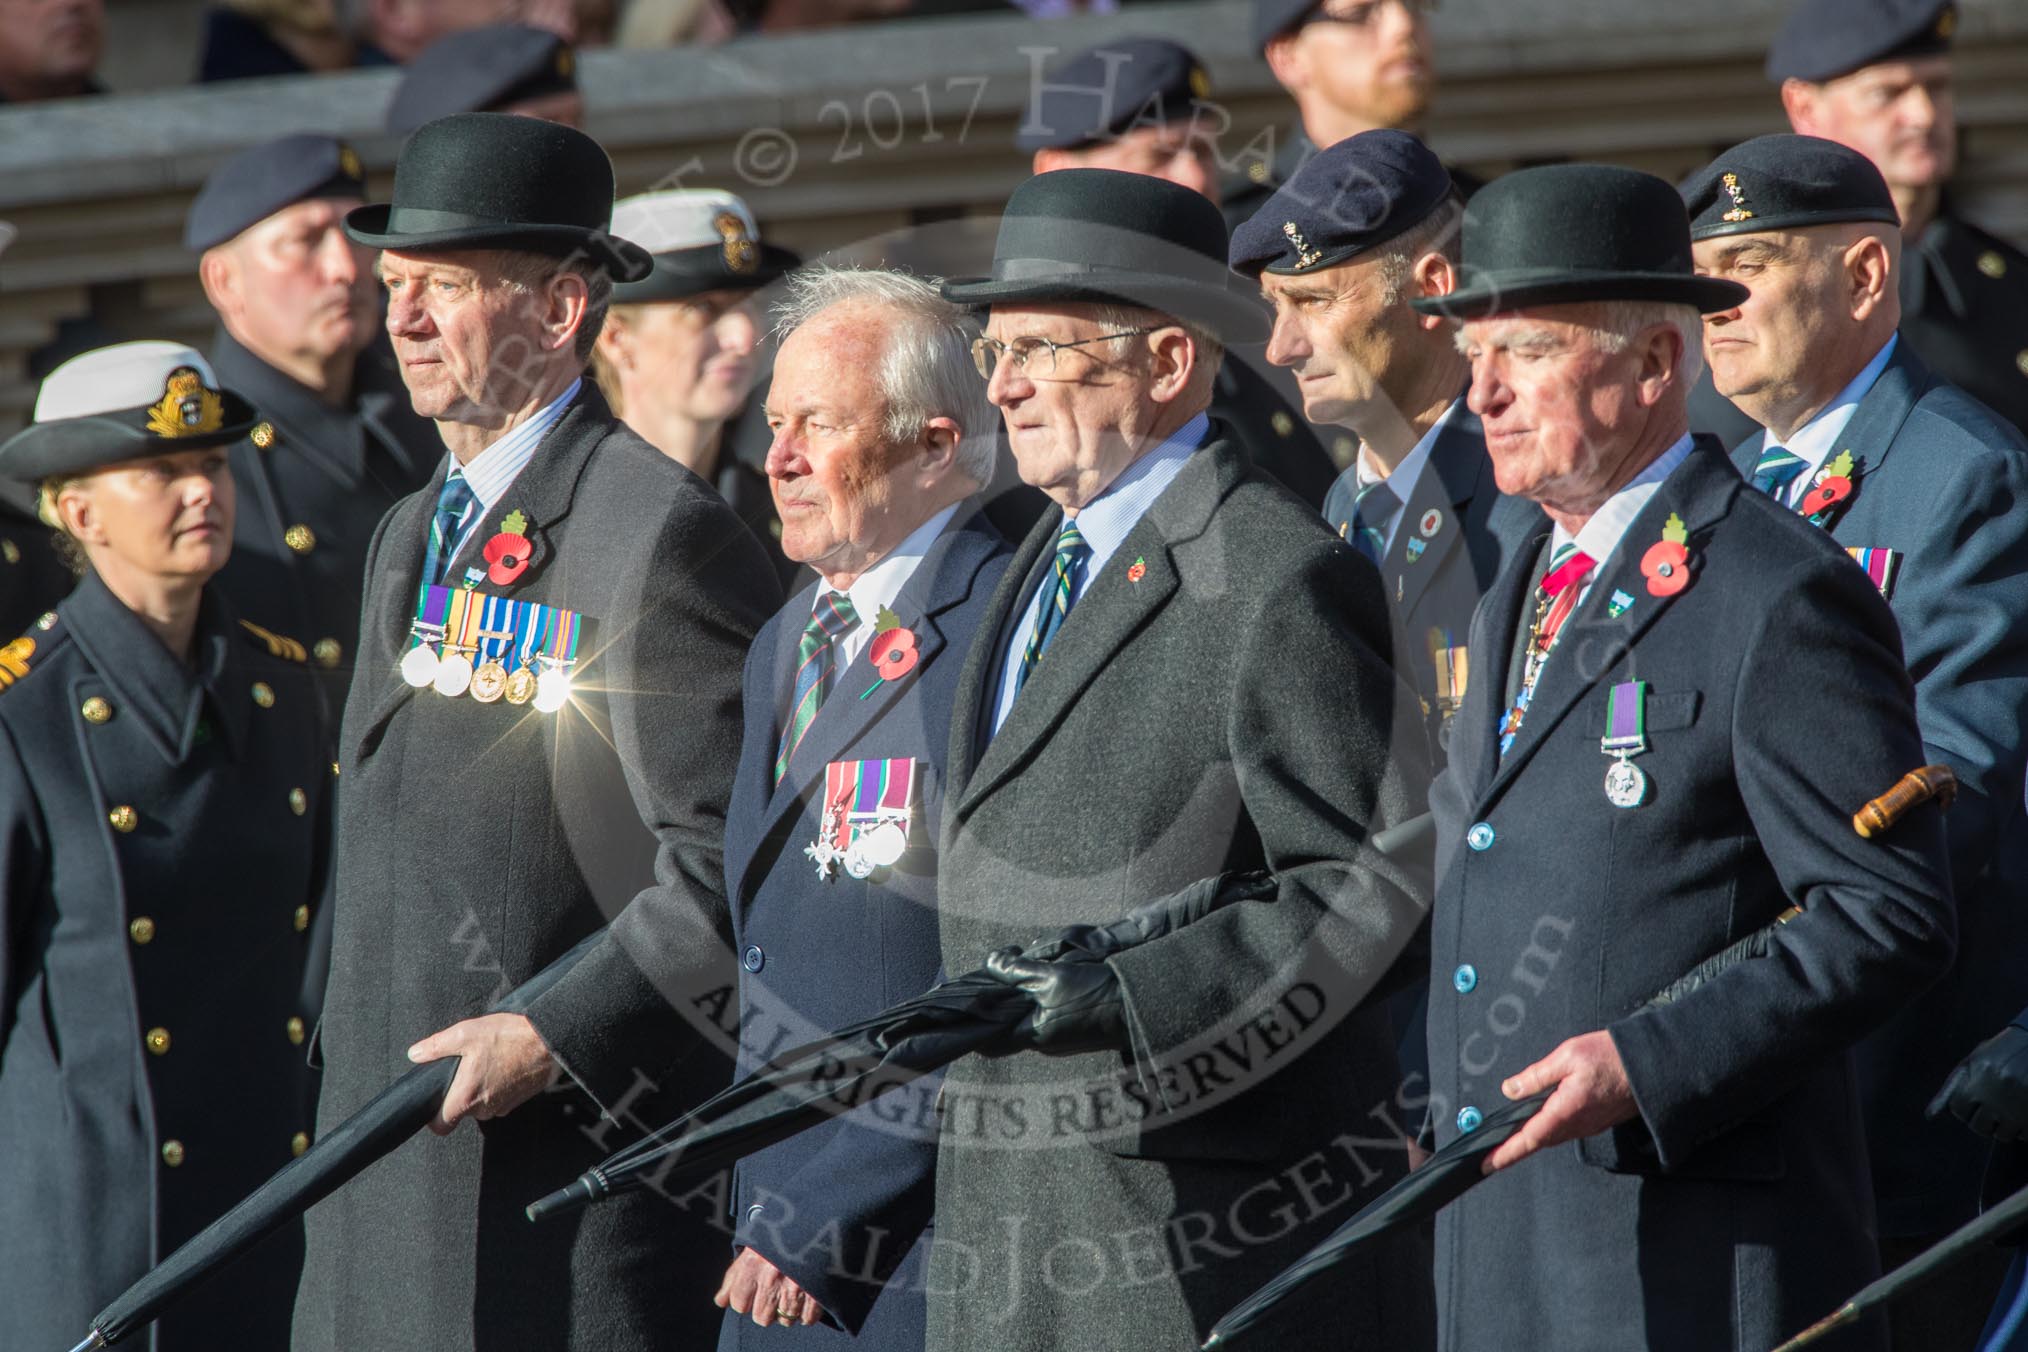 Royal Signals Association (Group B6, 49 members) during the Royal British Legion March Past on Remembrance Sunday at the Cenotaph, Whitehall, Westminster, London, 11 November 2018, 12:06.